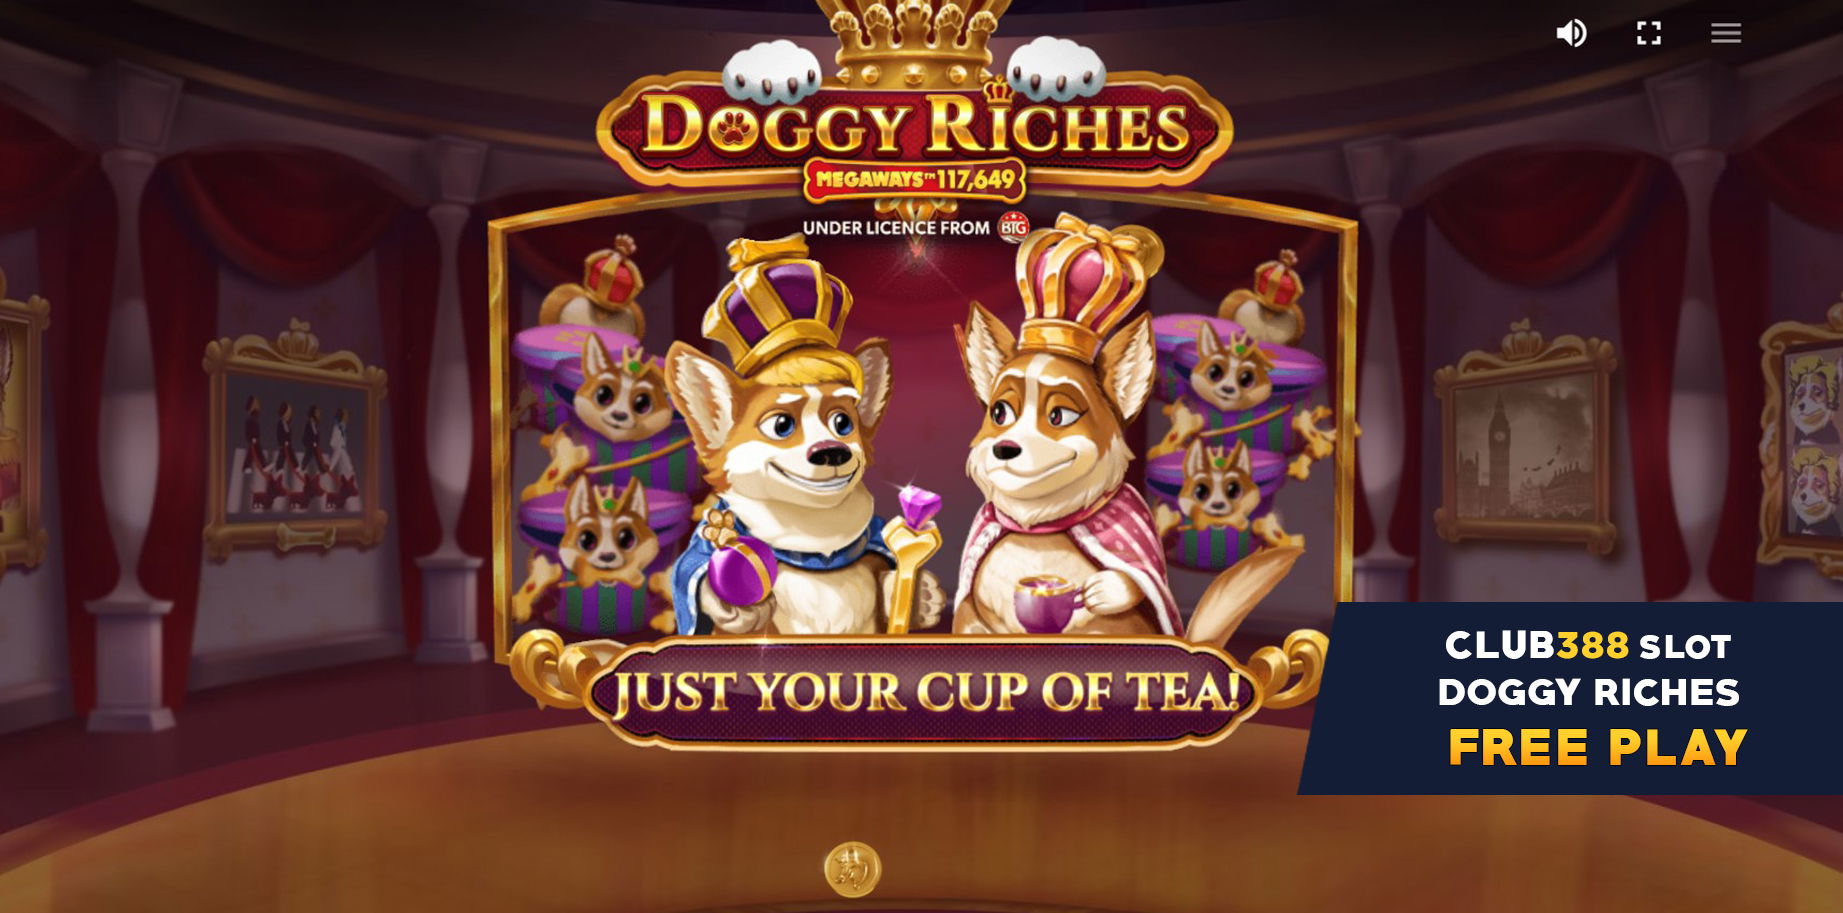 10 Doggy Riches Slot Game Red Tiger - Club388